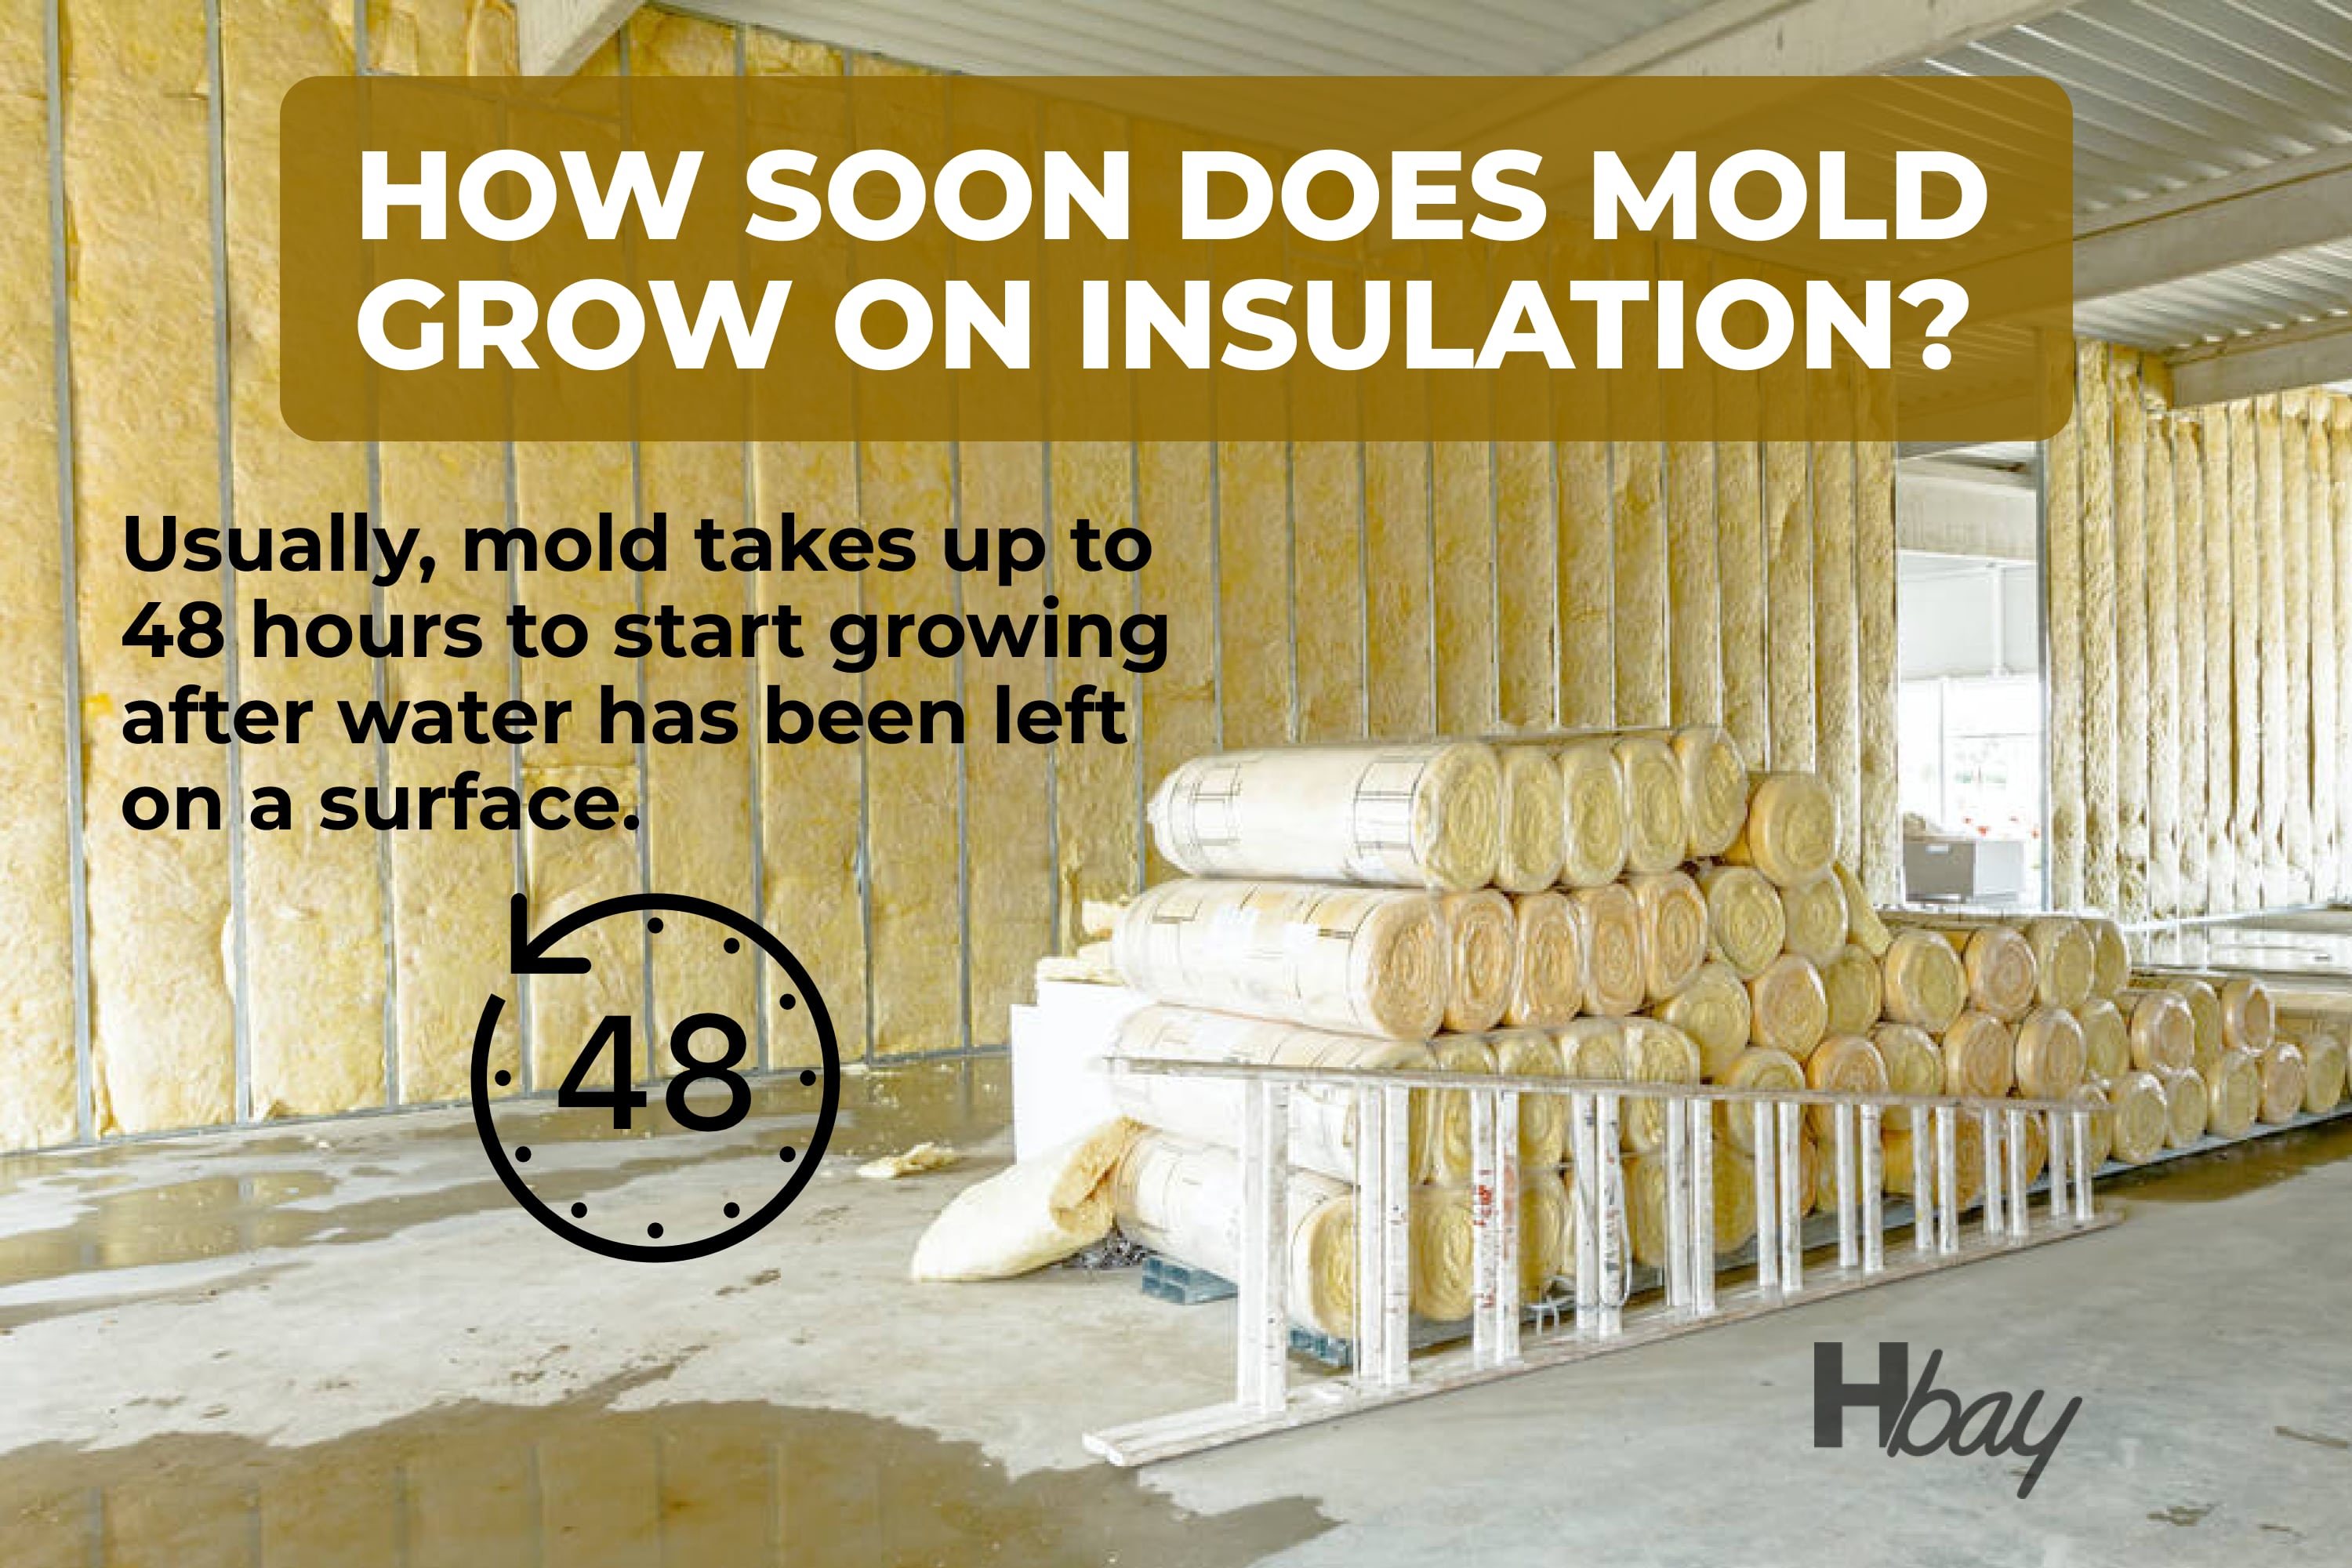 How soon does mold grow on insulation